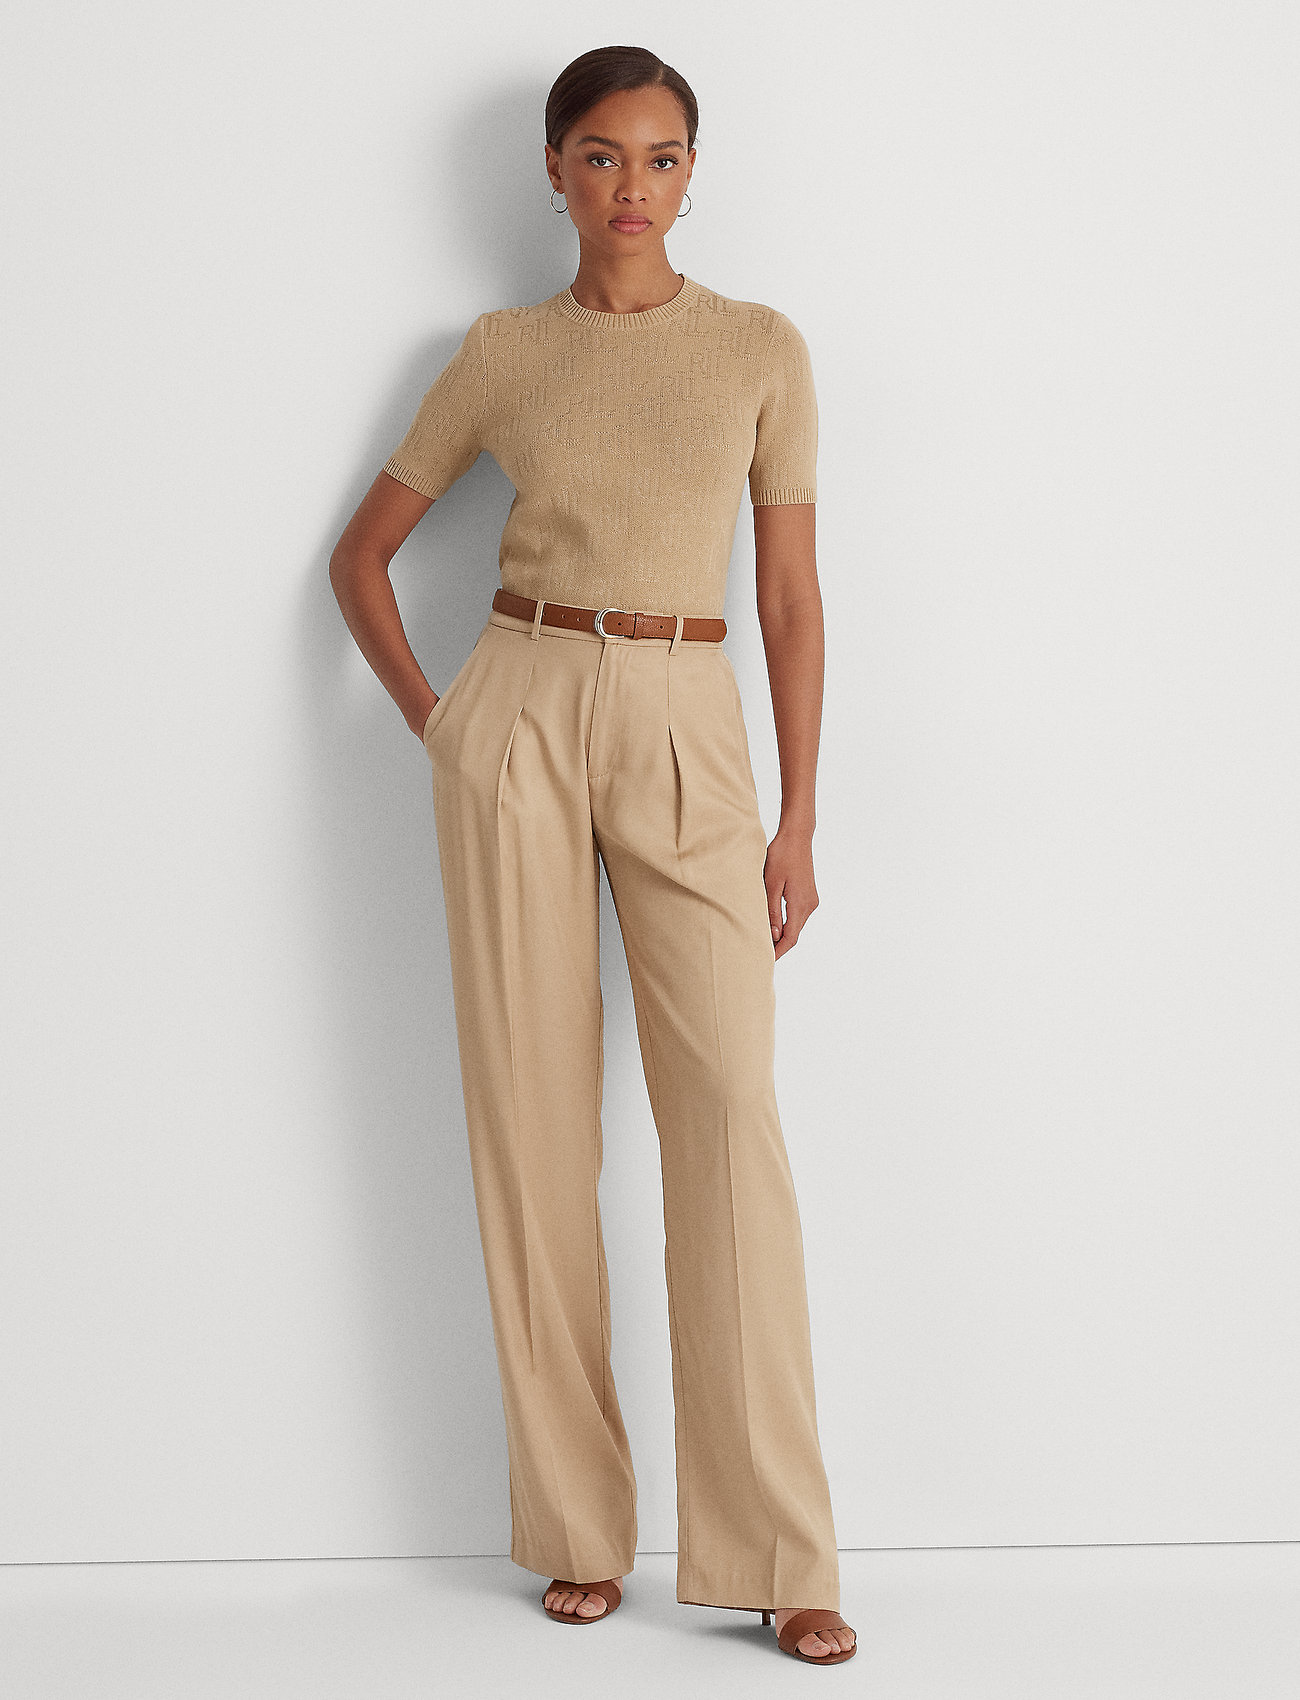 Cream Wide Leg Trousers Outfit | Casual Look